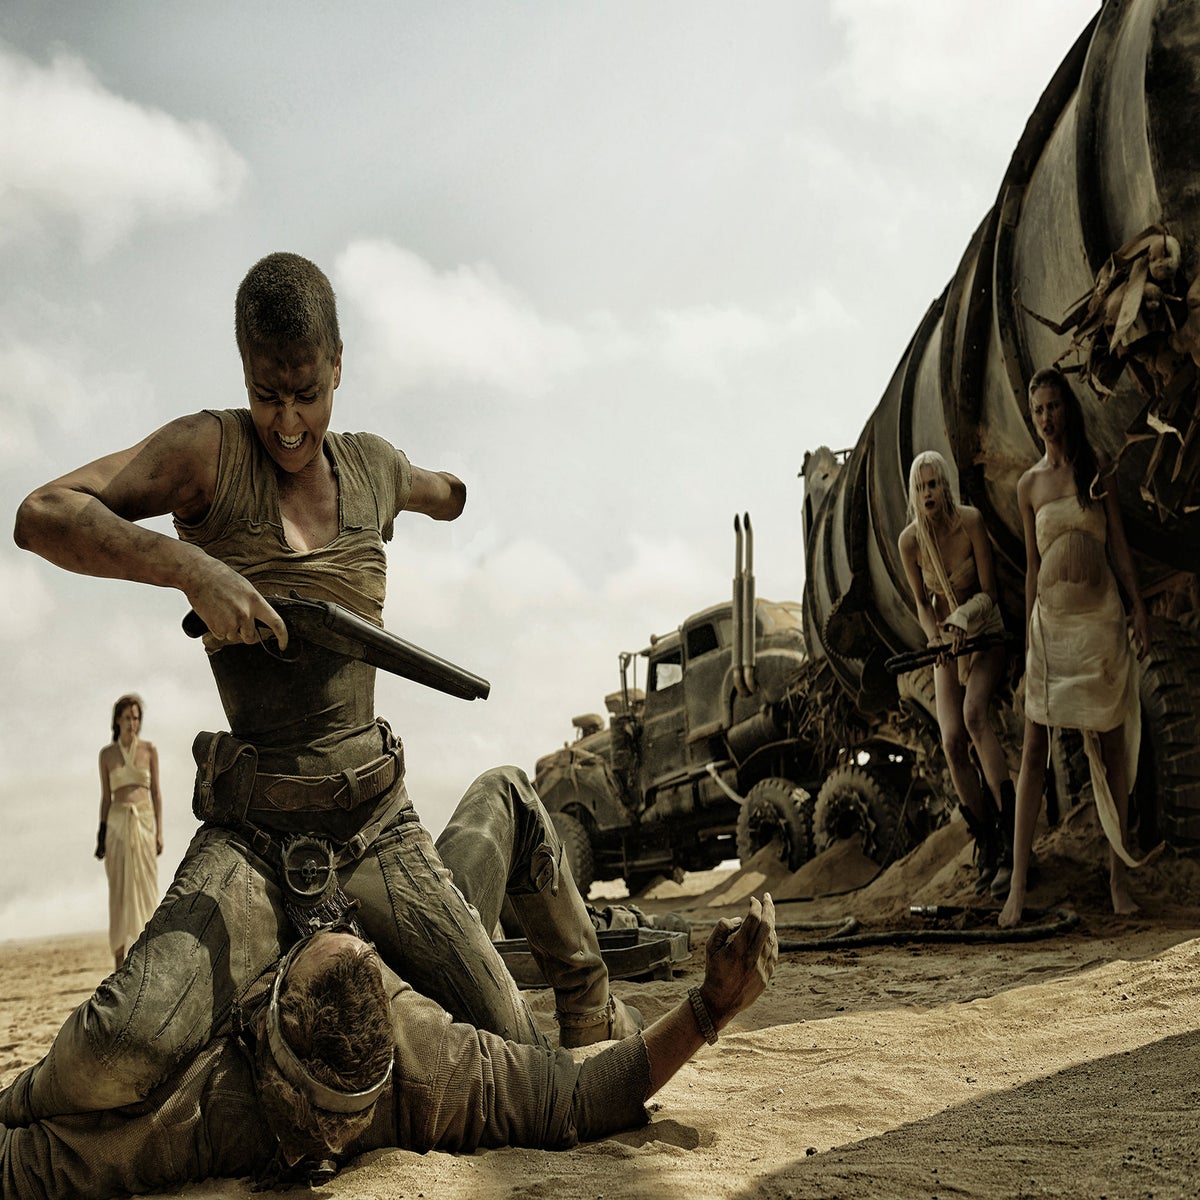 Mad Max Fury Road: When a film upsets misogynists it only makes me